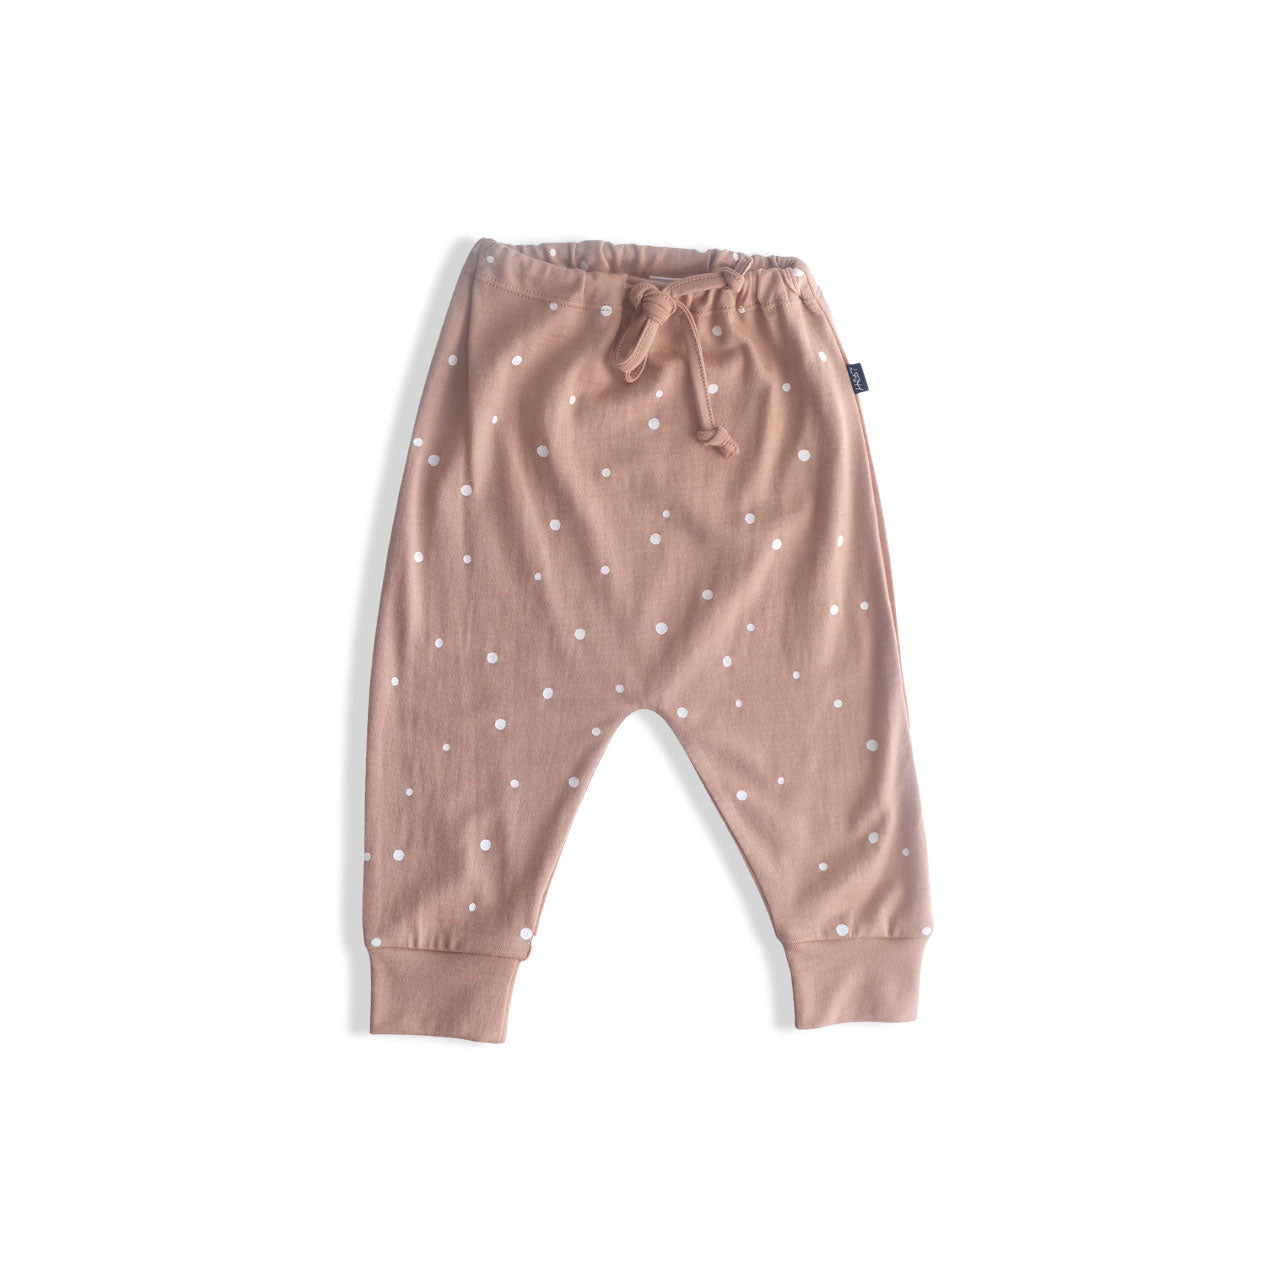 Asher Pants, Biscotti Speckle